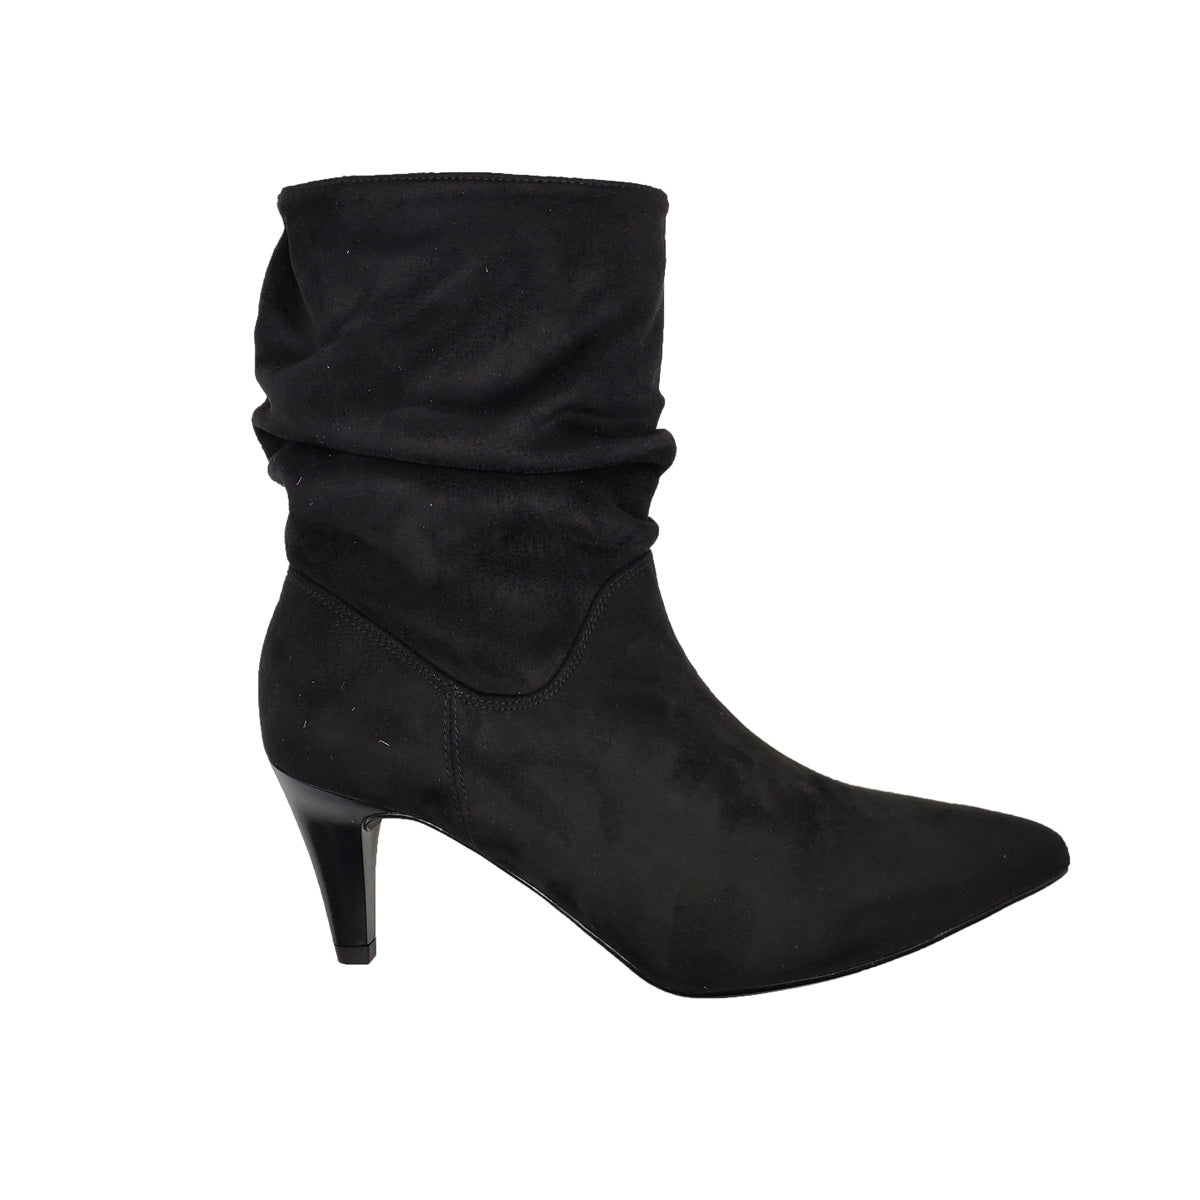 Women's Footwear Curled Ankle Boots In Black Suede With High Heels